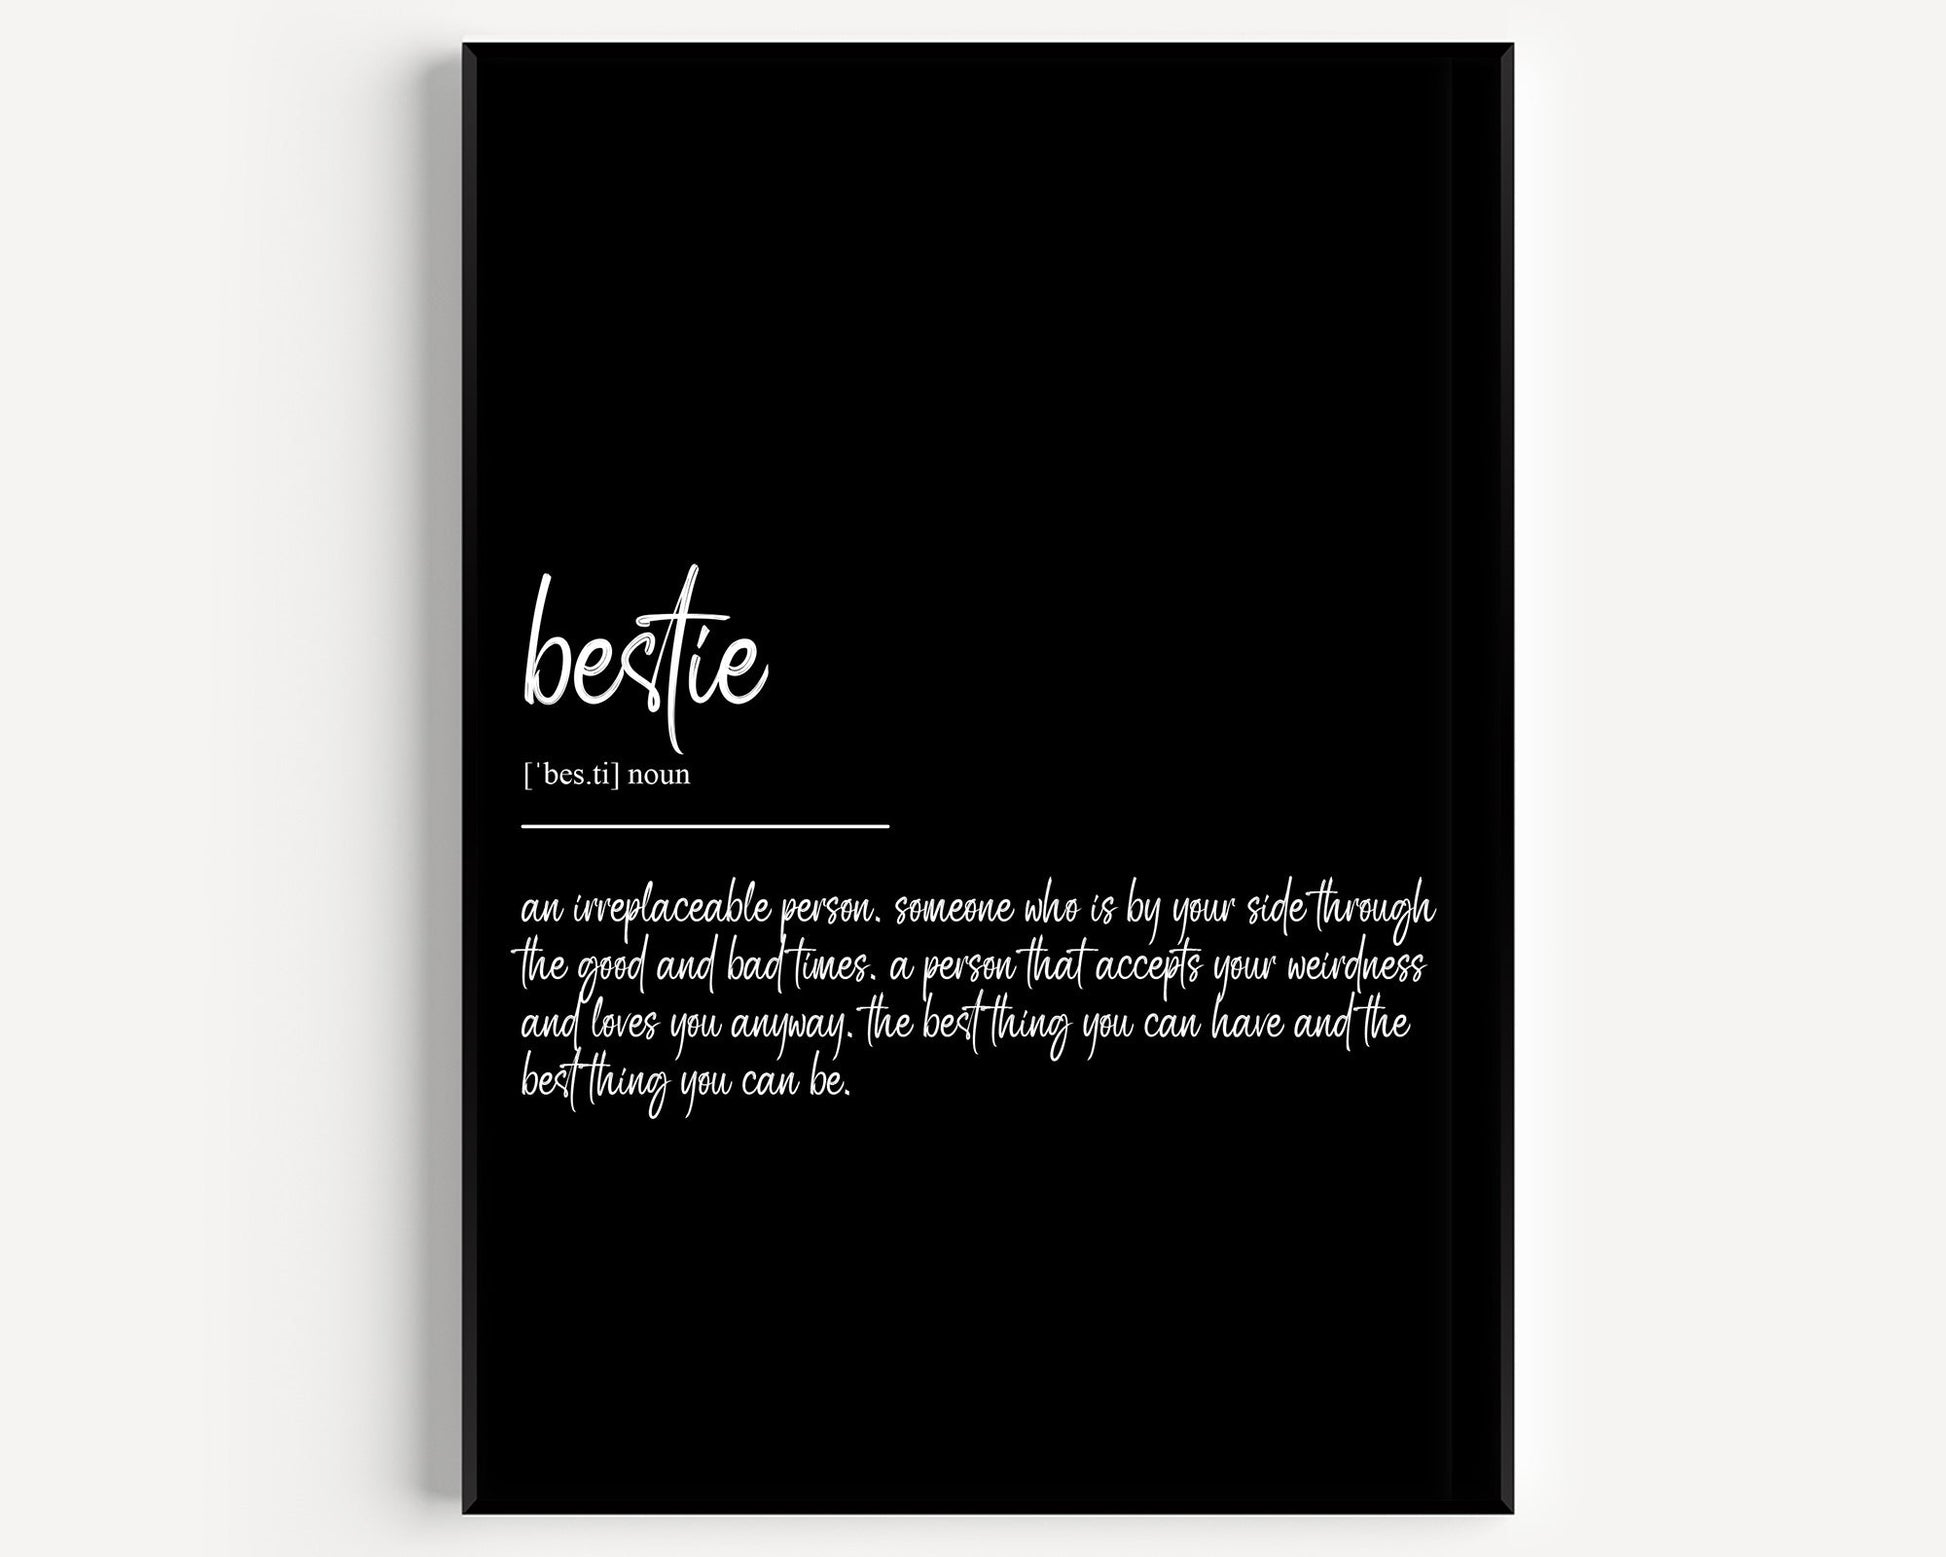 Bestie Definition Print V3 - Magic Posters